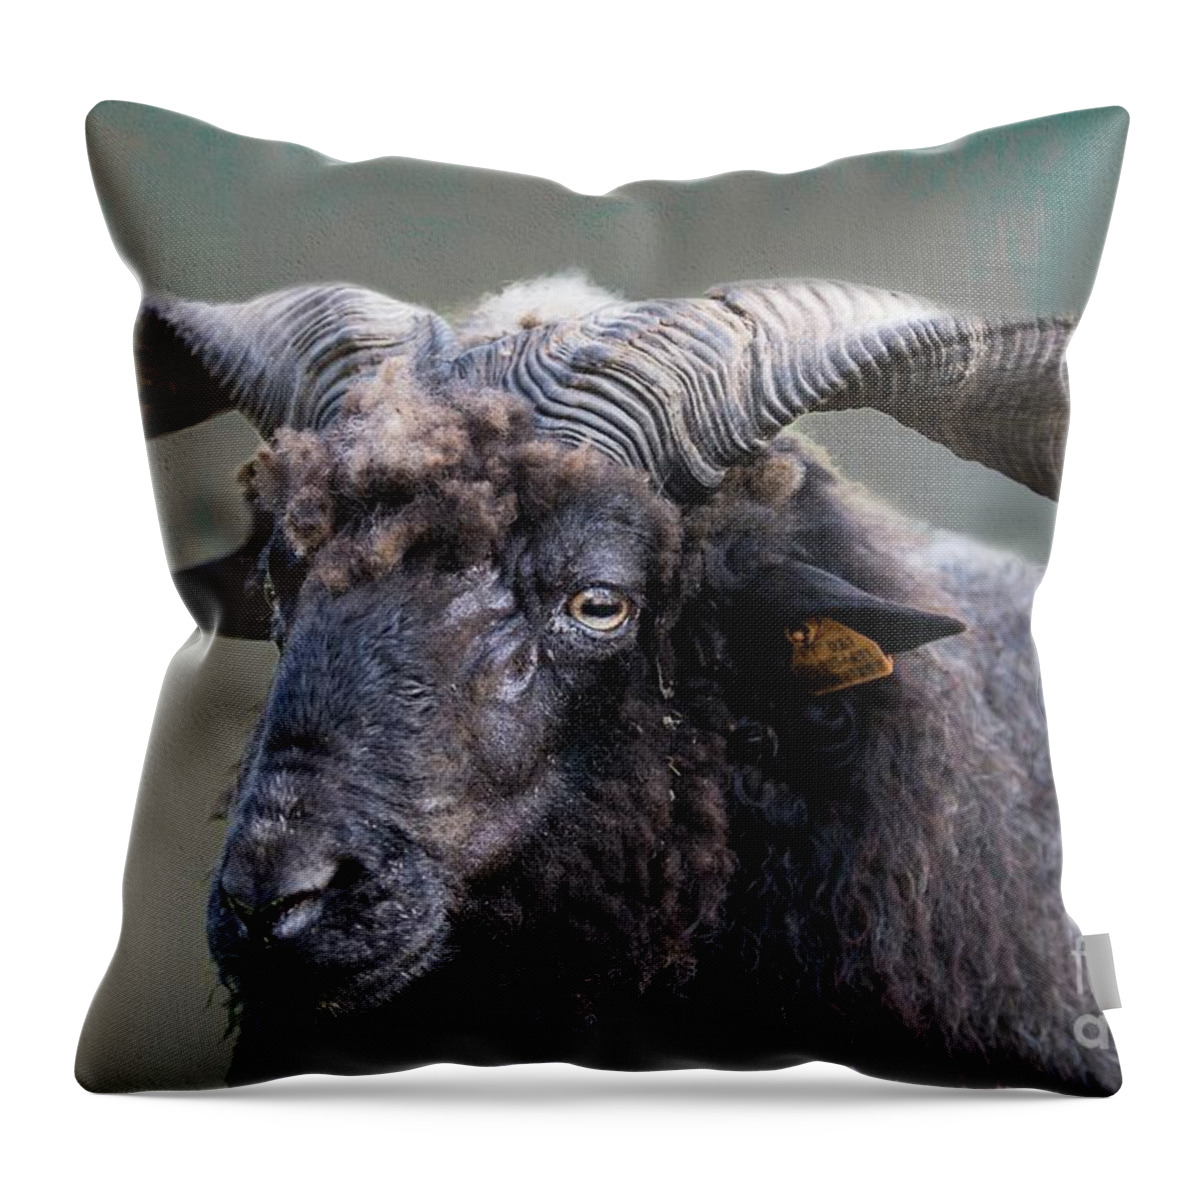 Racka Throw Pillow featuring the photograph Racka Portrait by Eva Lechner